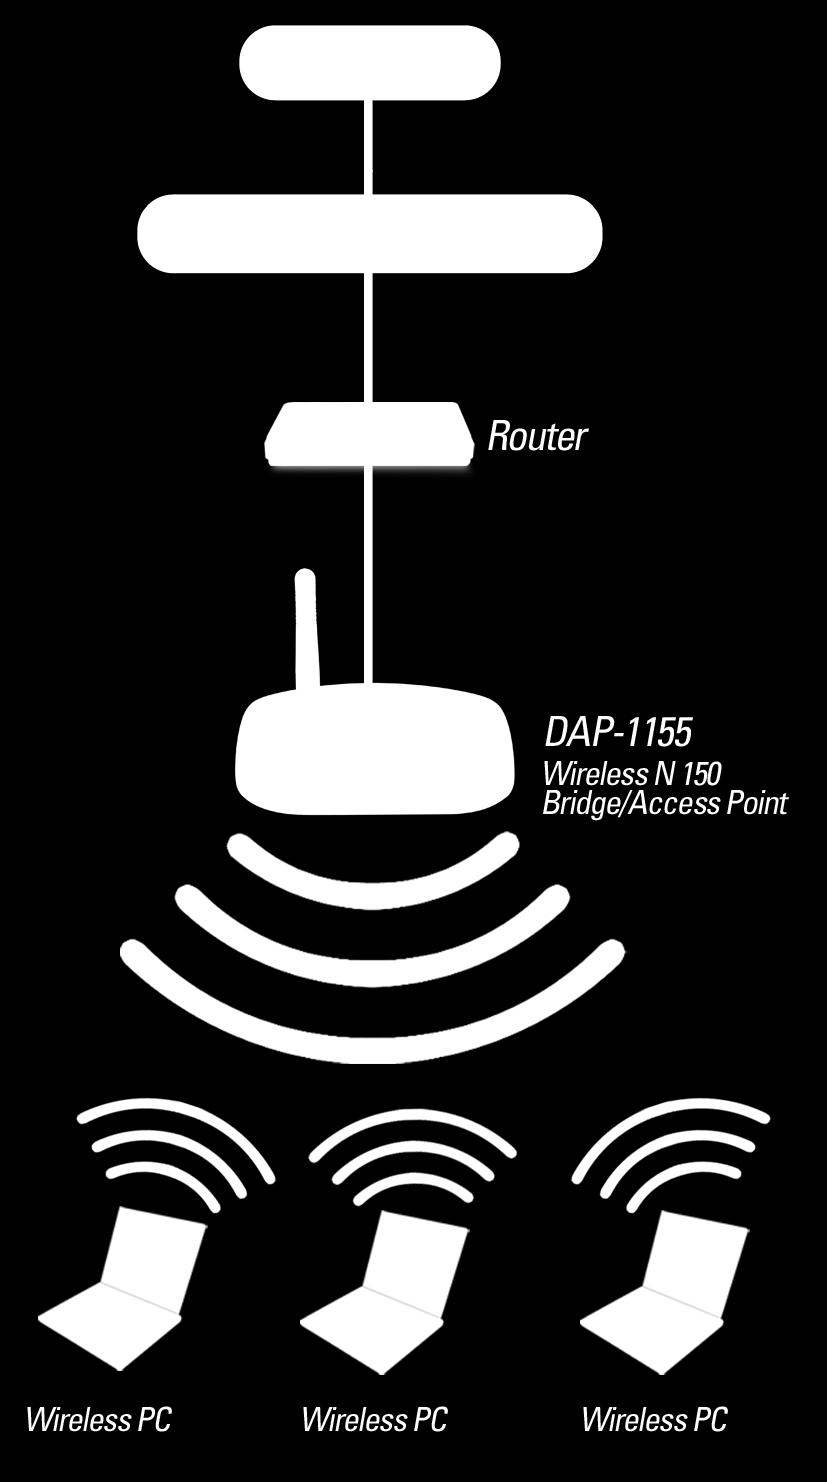 Access Point Mode In Access Point mode, the DAP-1155 acts as a central connection point for any computer (client) that has a 802.11n or backwardcompatible 802.